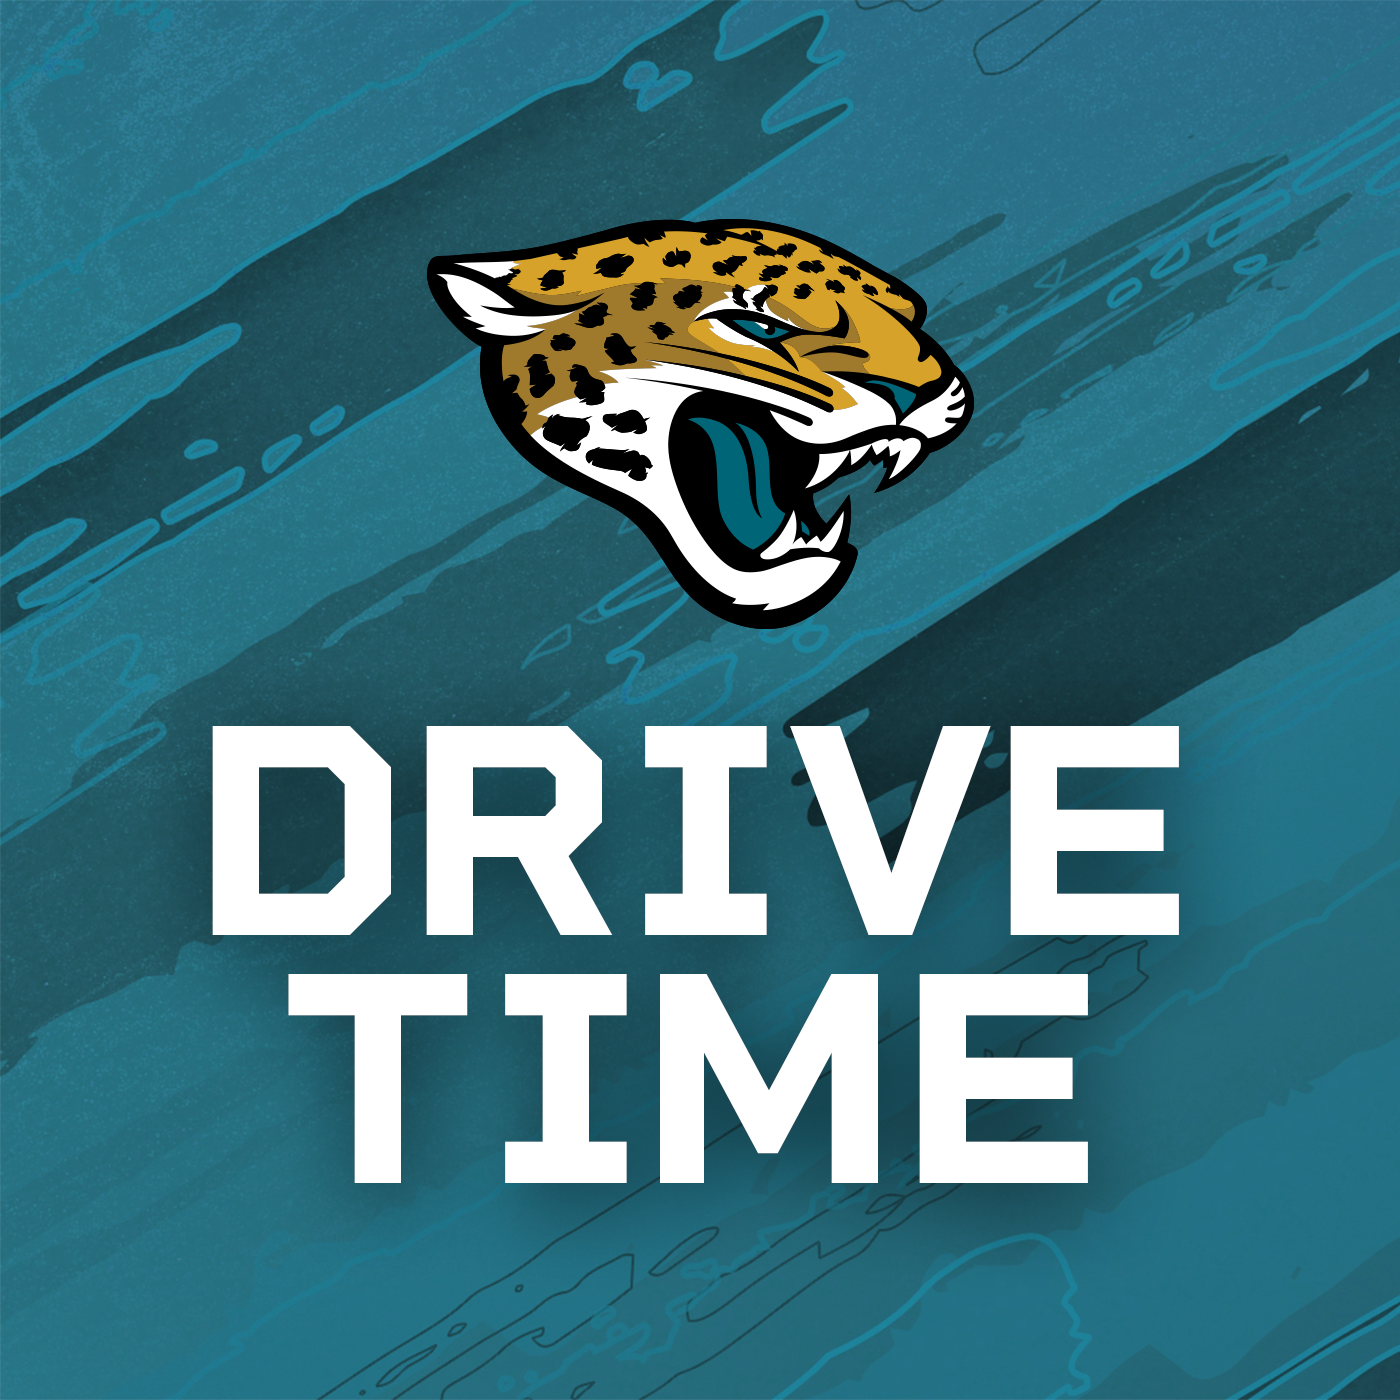 Victory Monday: Recapping Raven's win | Jags Drive Time: Monday, November 28